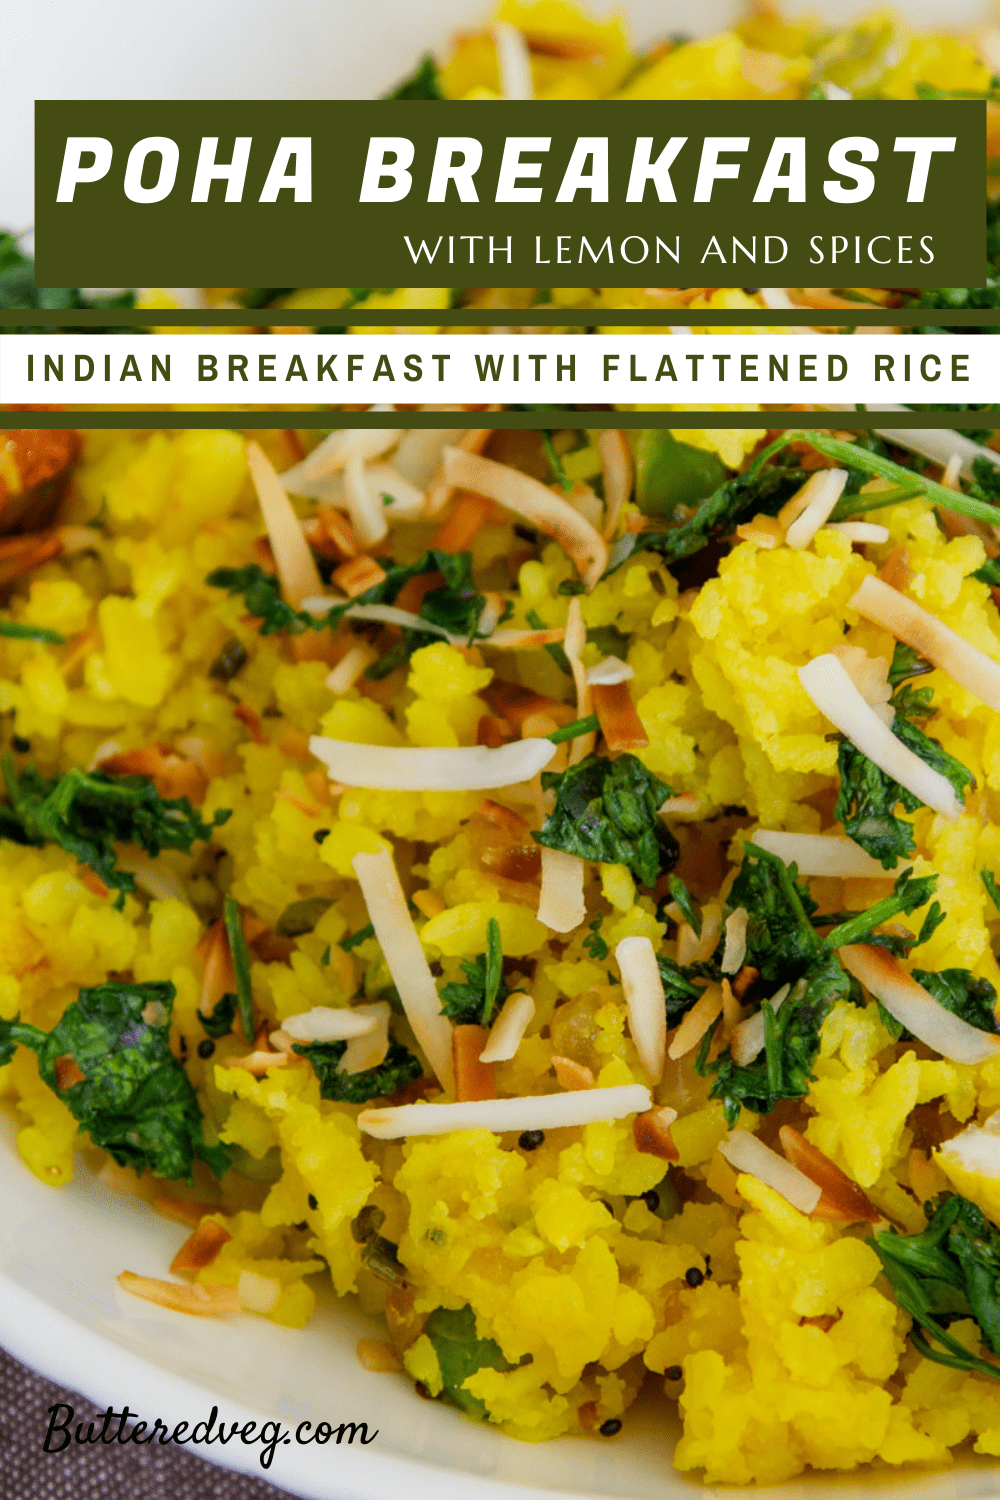 Poha Breakfast (Rice Flakes with Lemon & Spices)